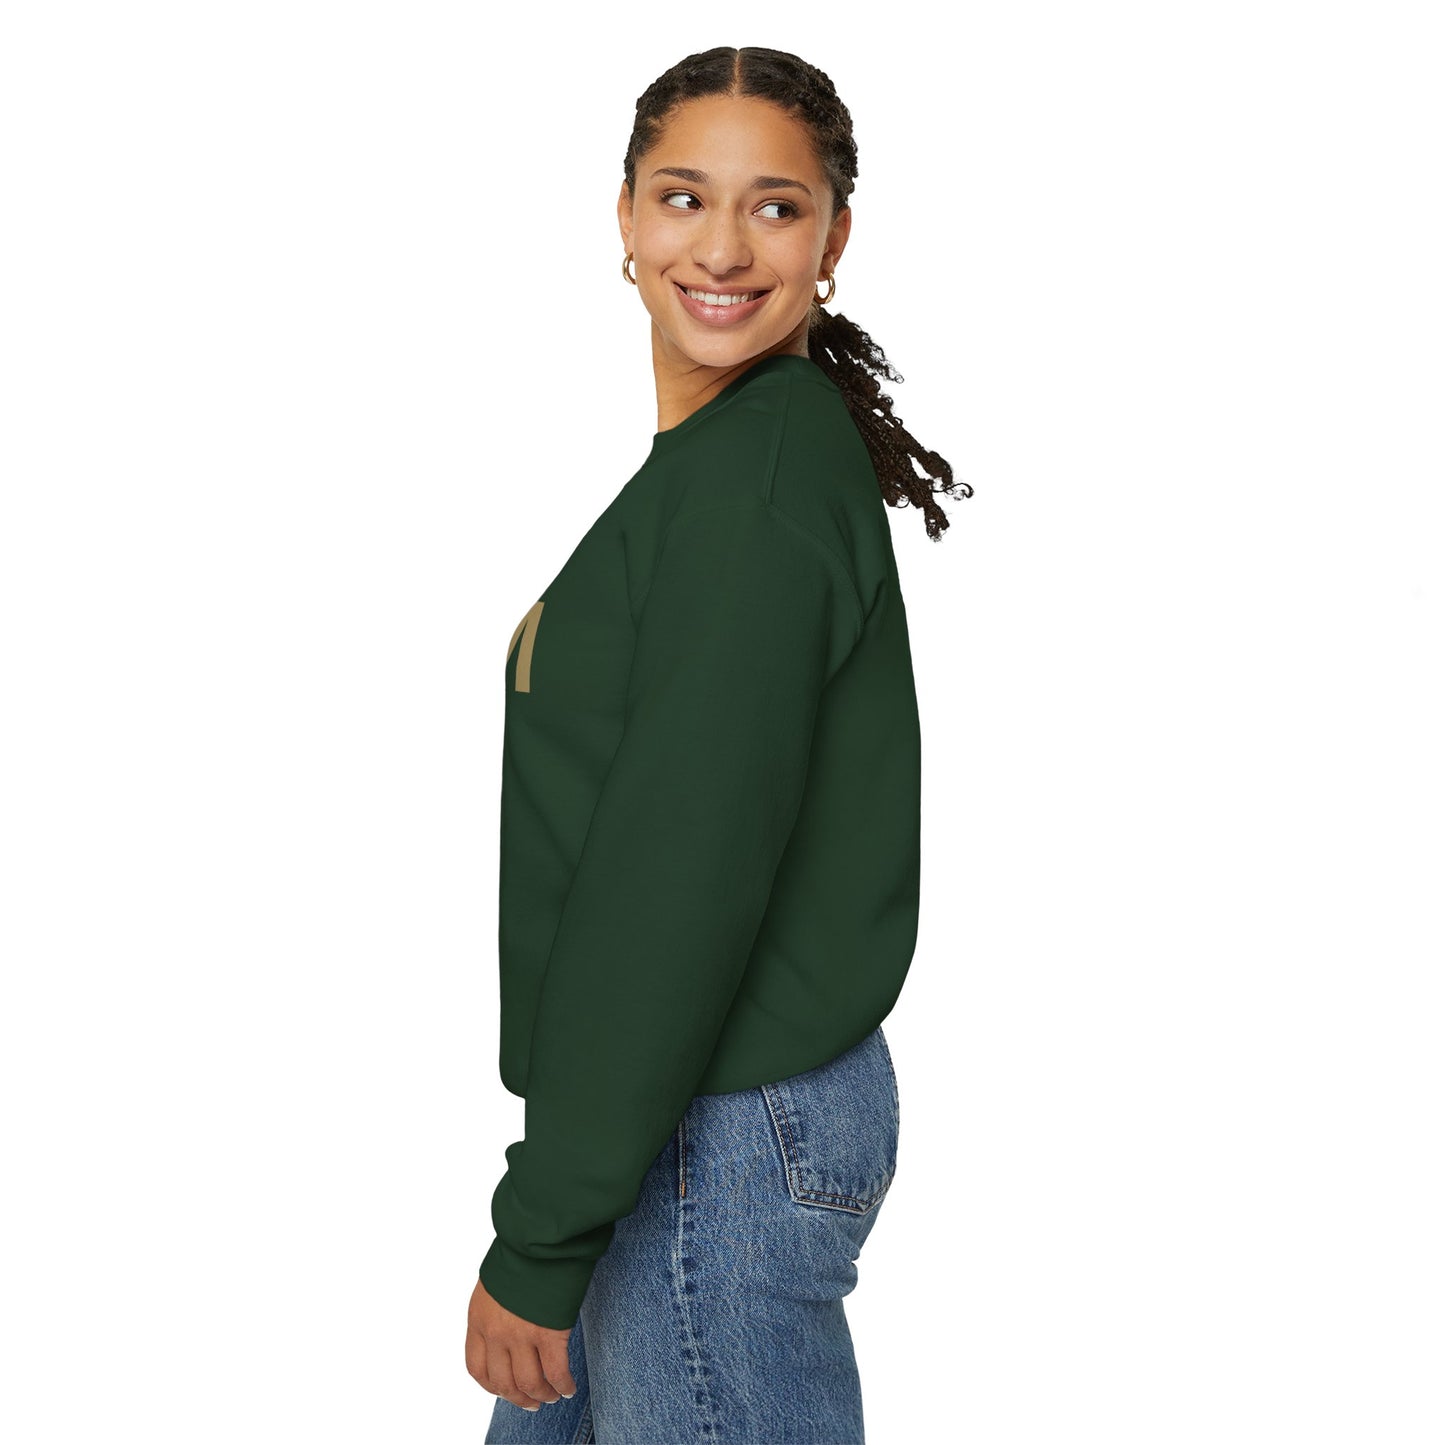 Sweatshirt: MoM with the EGA (your choice of colors)